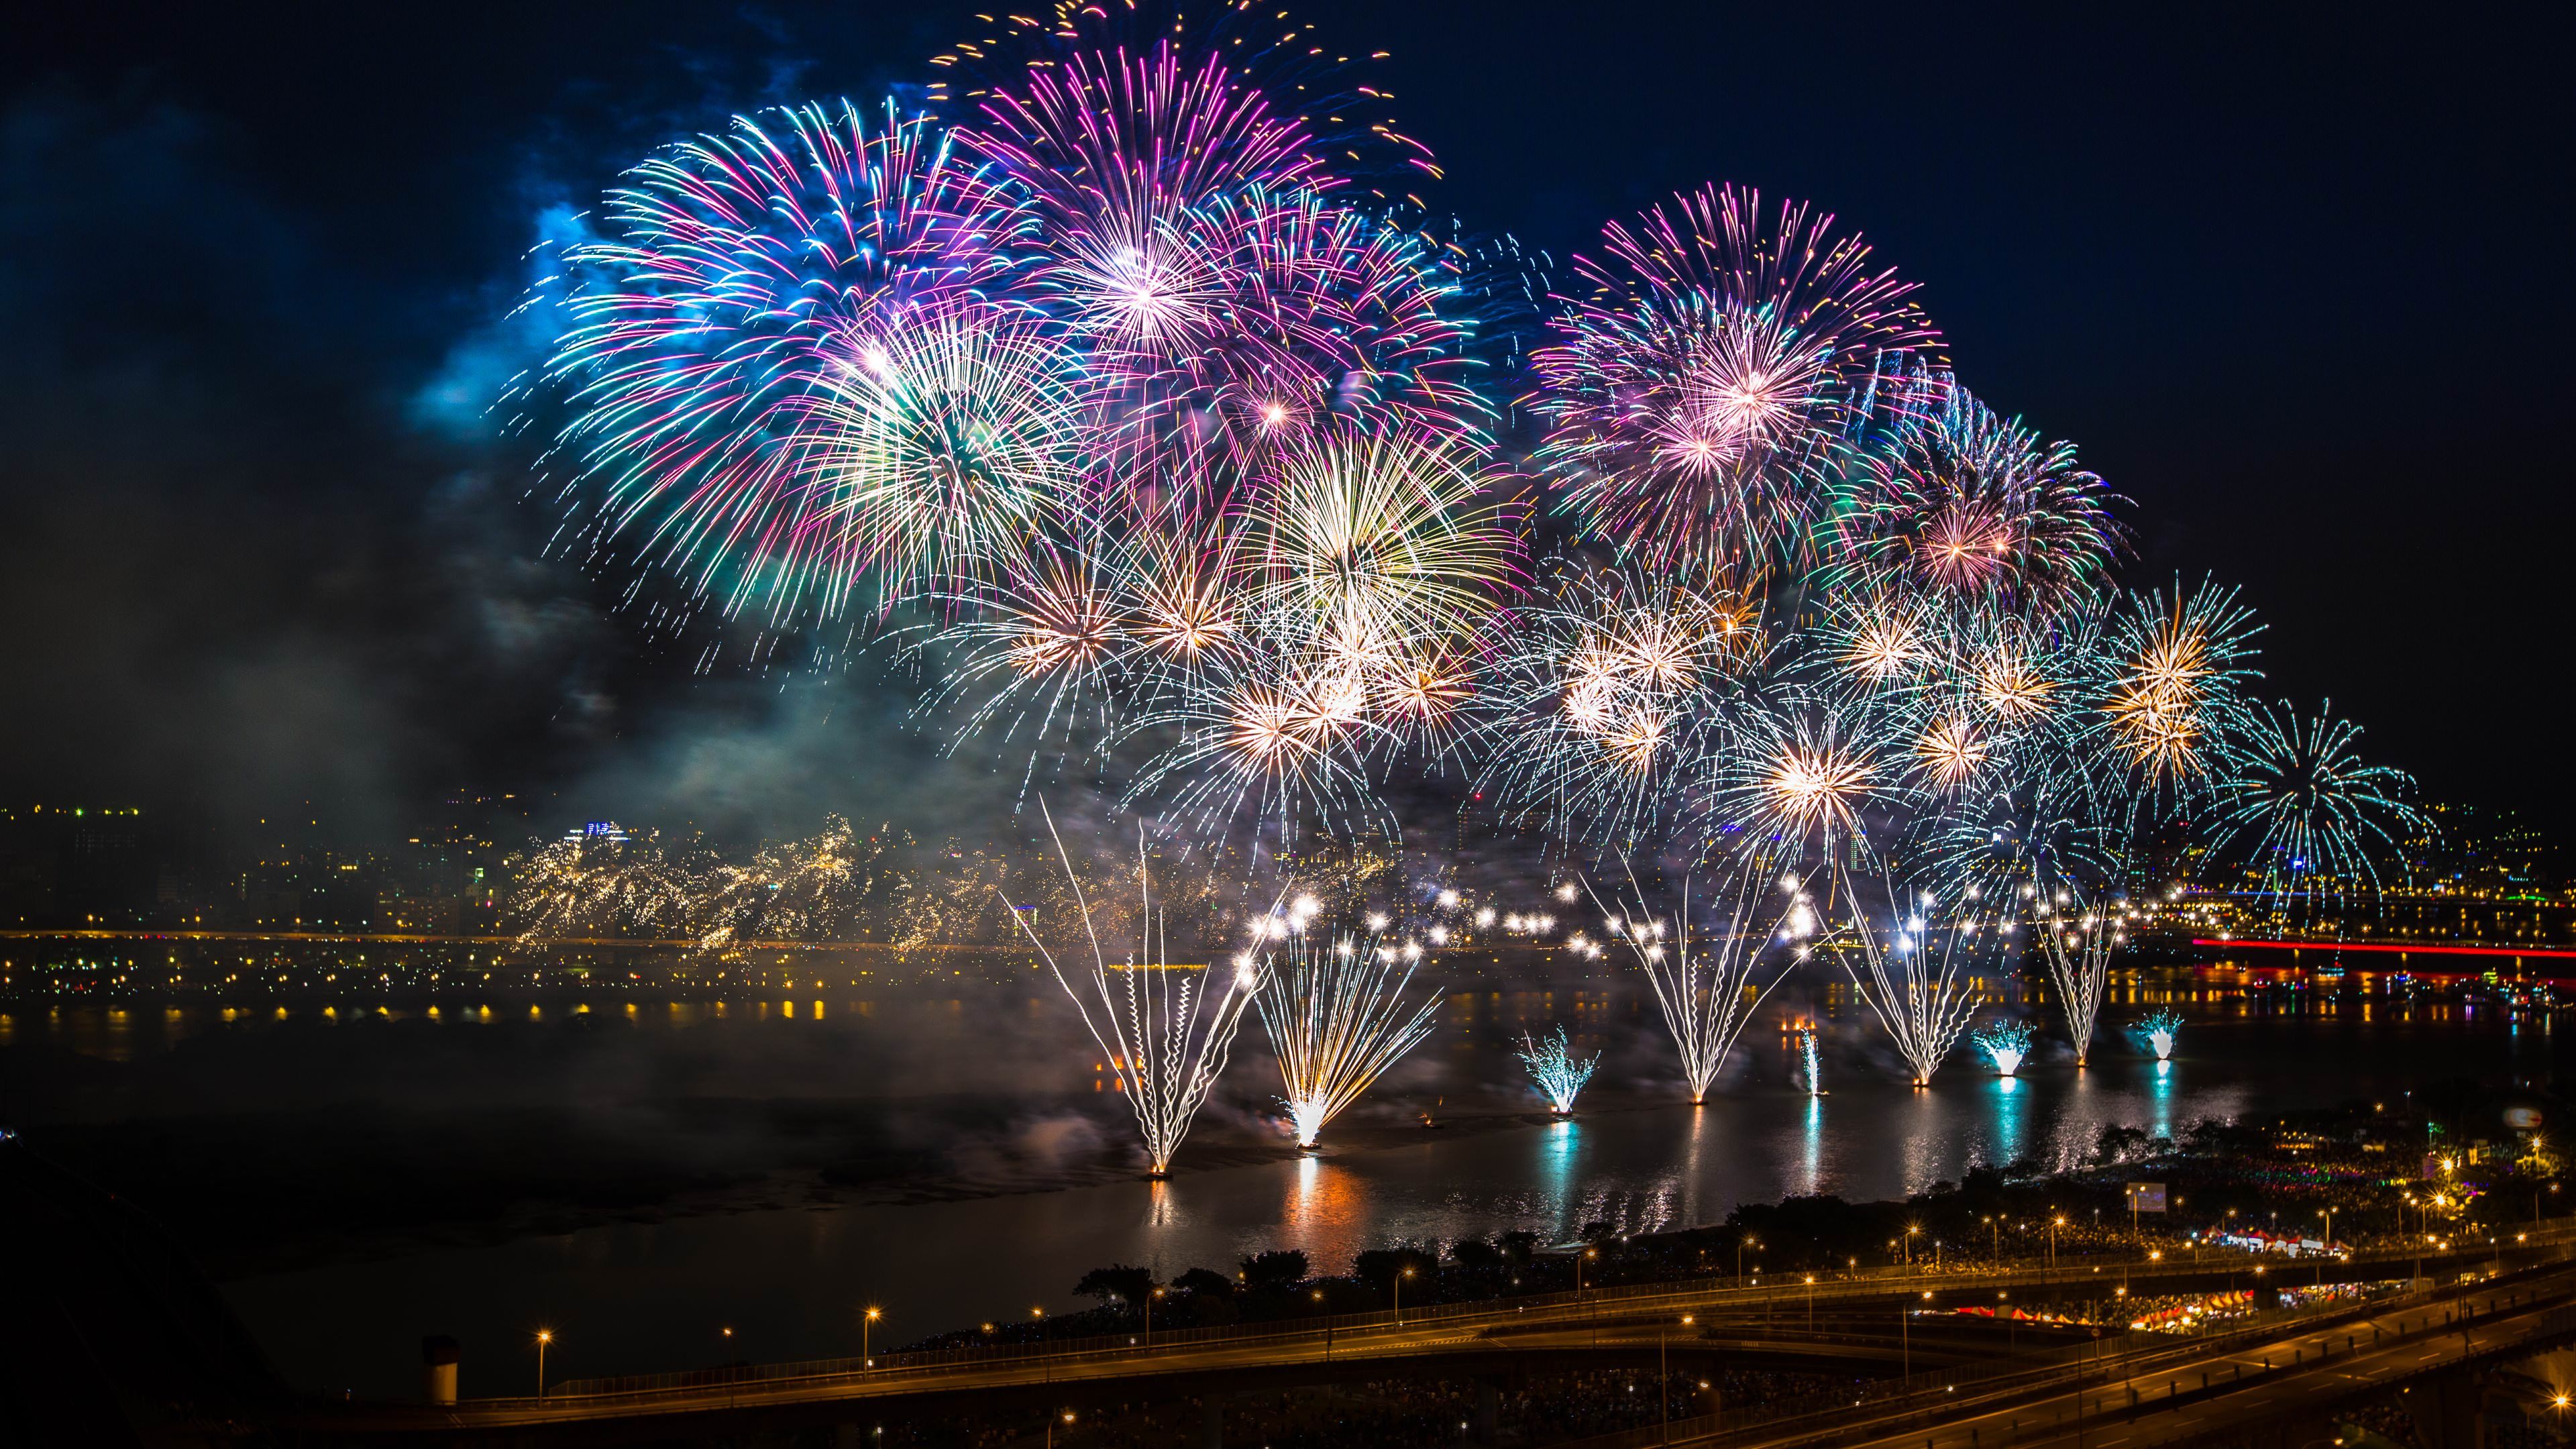 Fireworks 4K wallpapers for your desktop or mobile screen free and easy to download